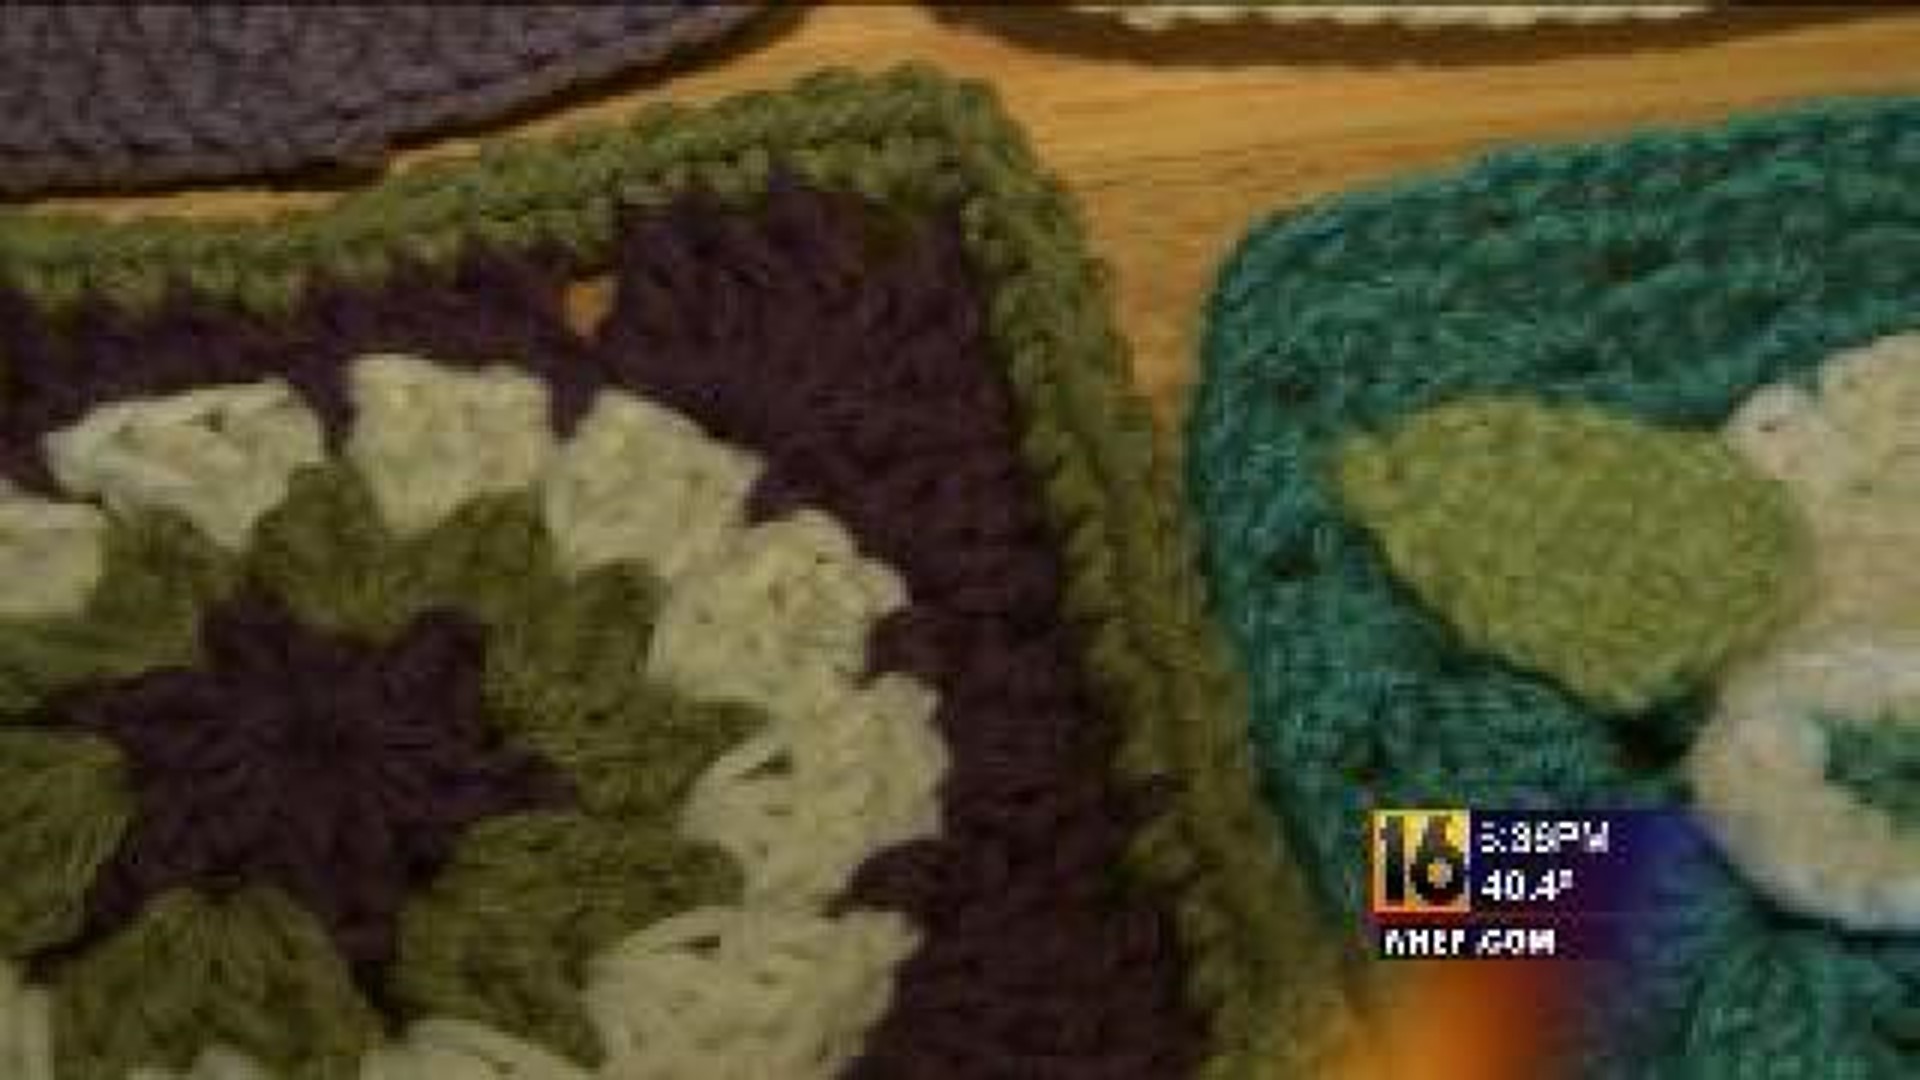 Memory Blankets for the Victims of Newtown